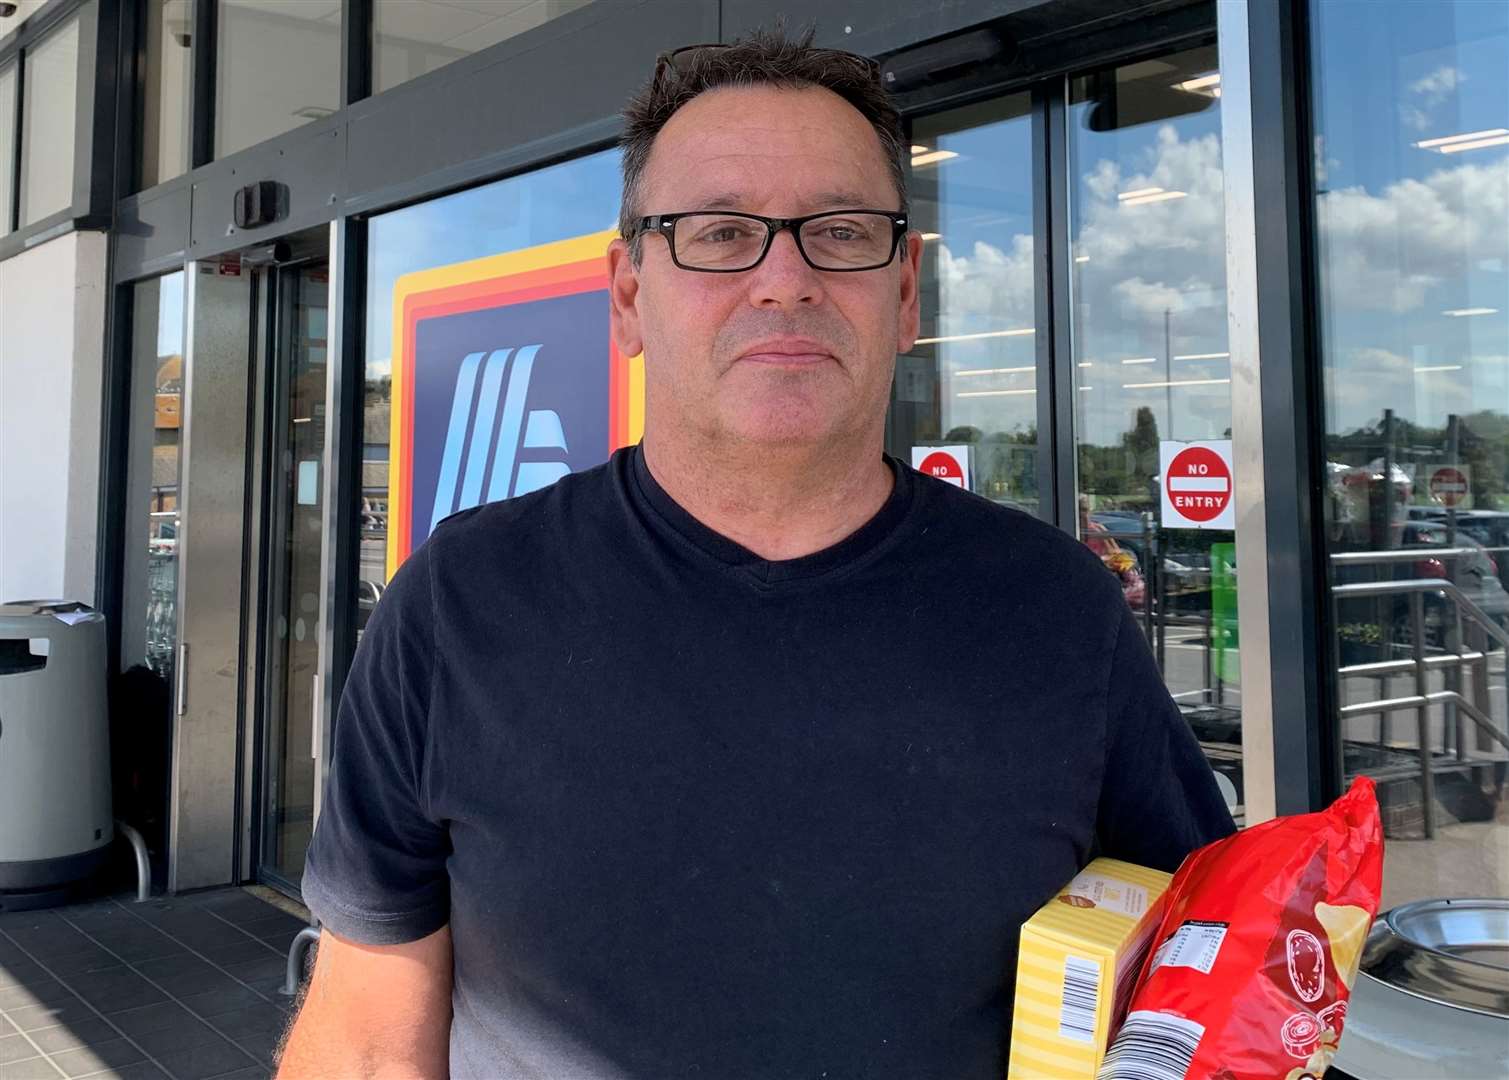 Steven Wigington only shops with cash, and hopes the new machines at Aldi Herne Bay will take it